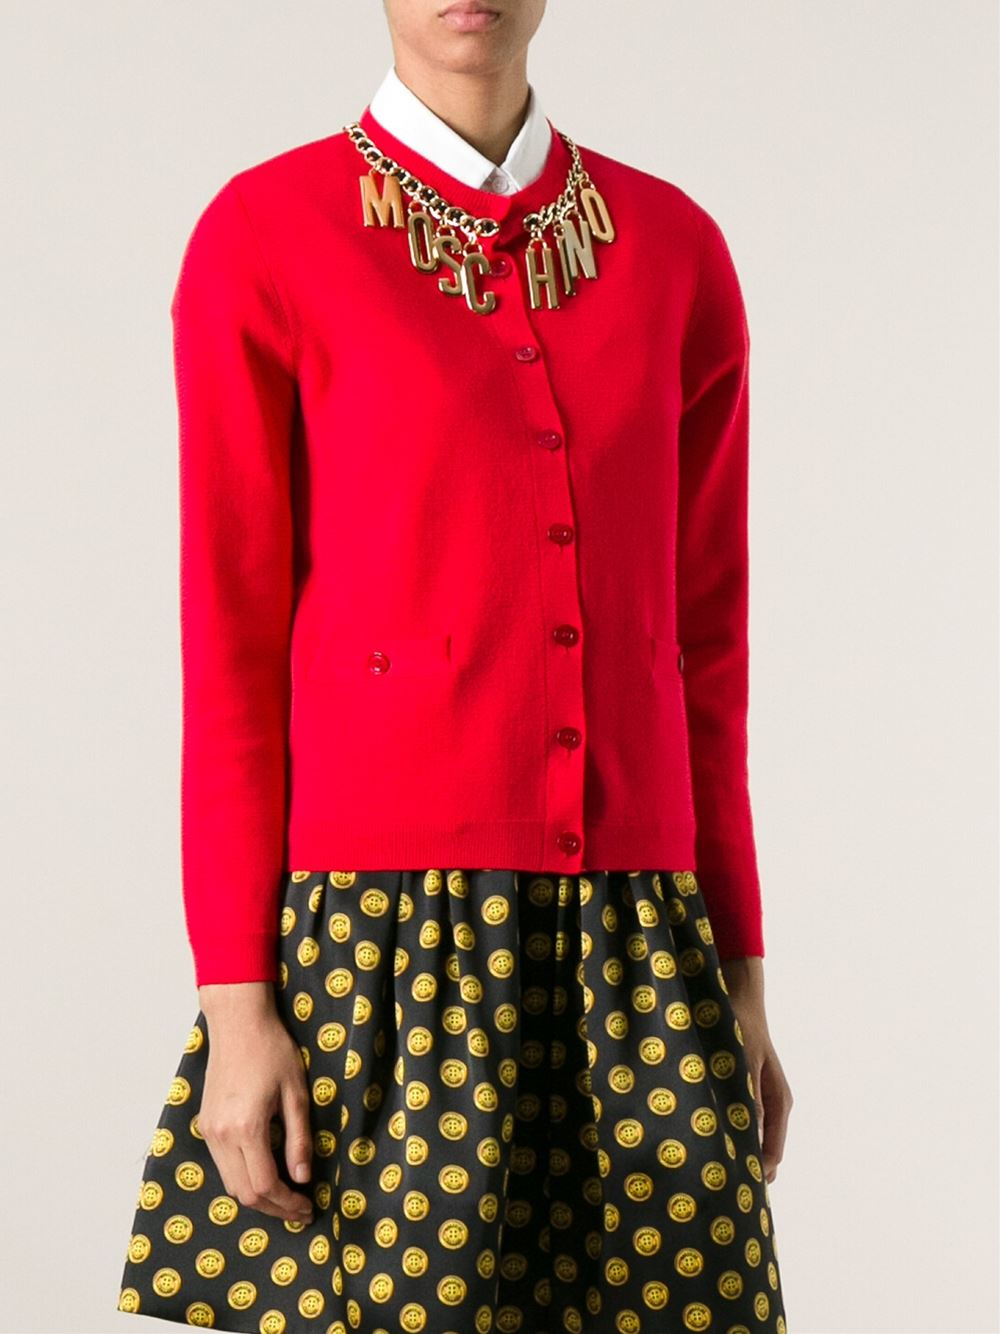 Moschino Logo Chain Cardigan in Red | Lyst